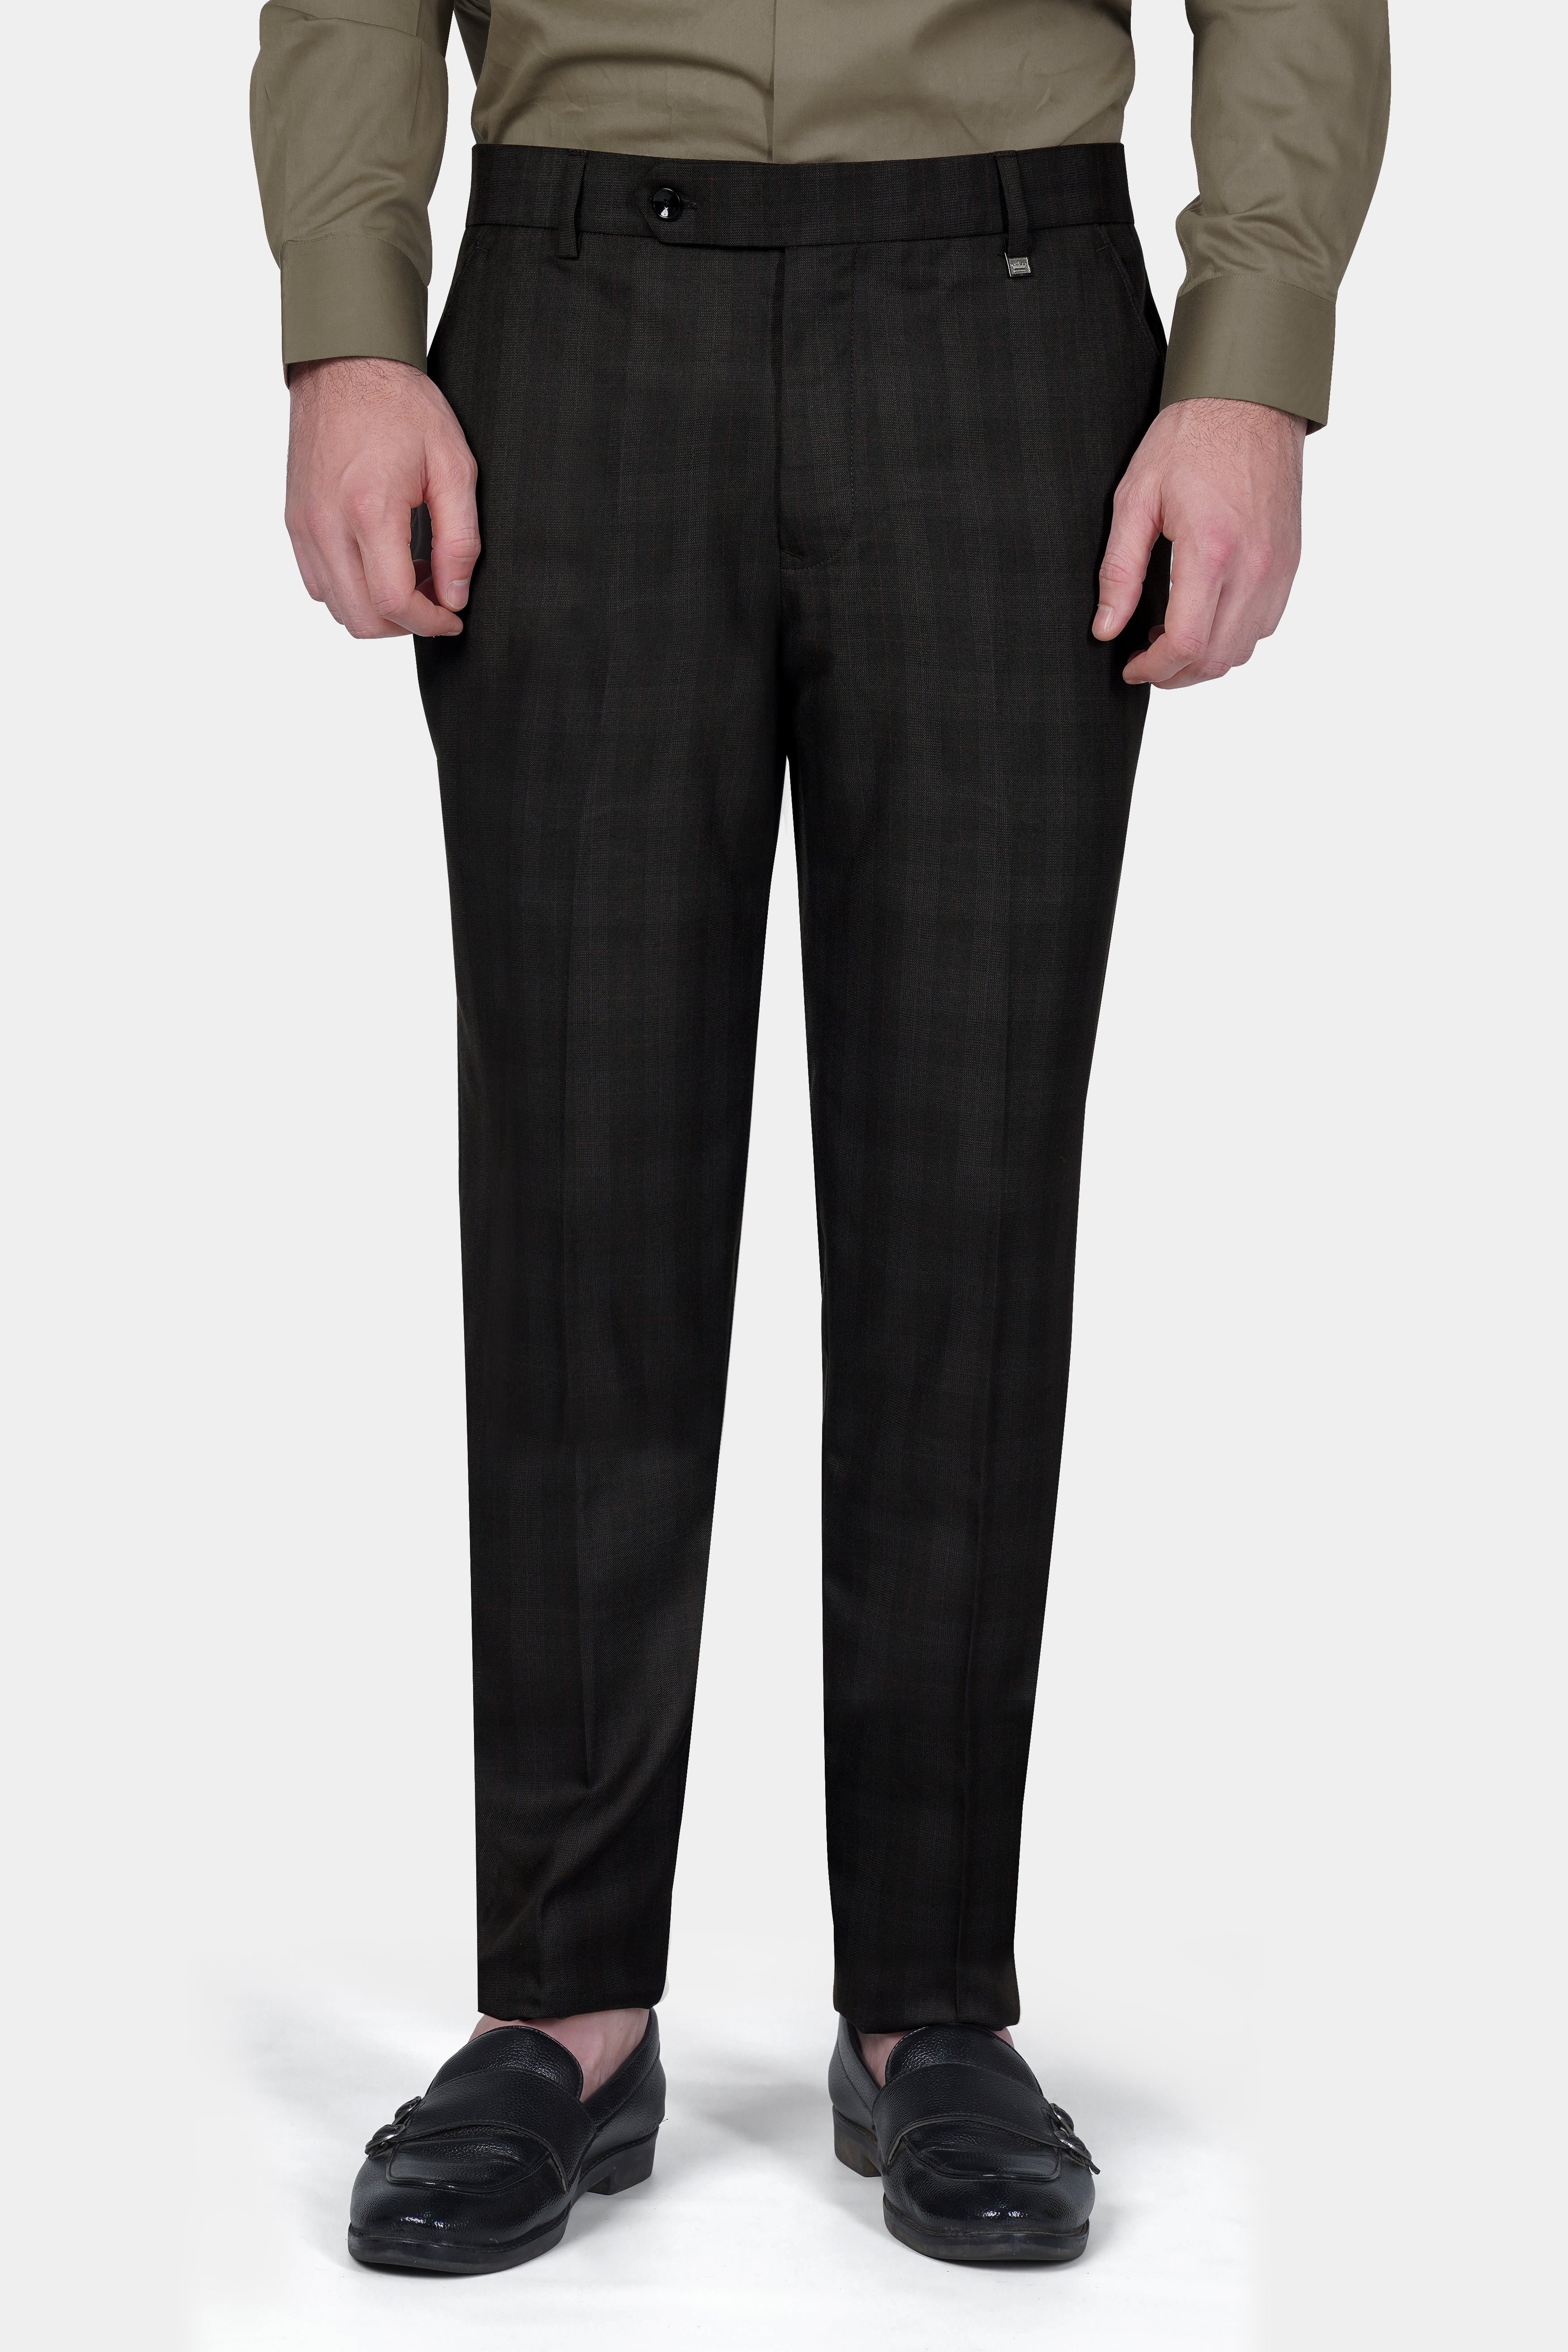 Onyx Black Checks-Plaid Premium Wool Blend Double Breasted Suit